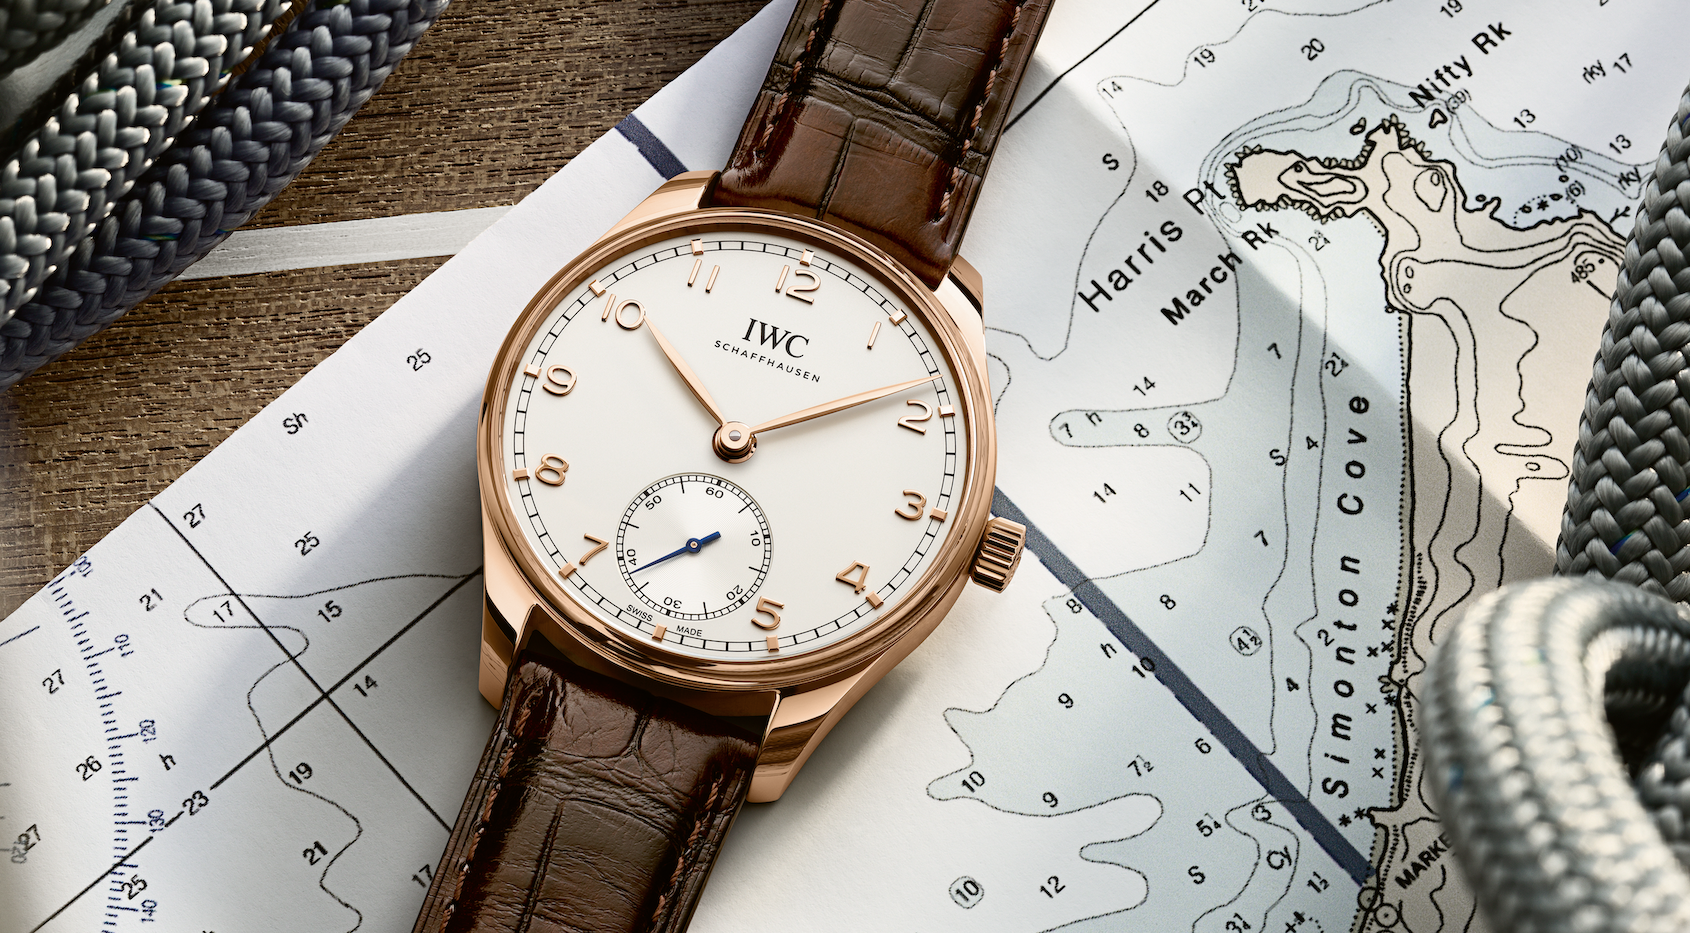 INTRODUCING: The IWC Portugieser Automatic 40, a new contender for the ultimate ‘one watch’